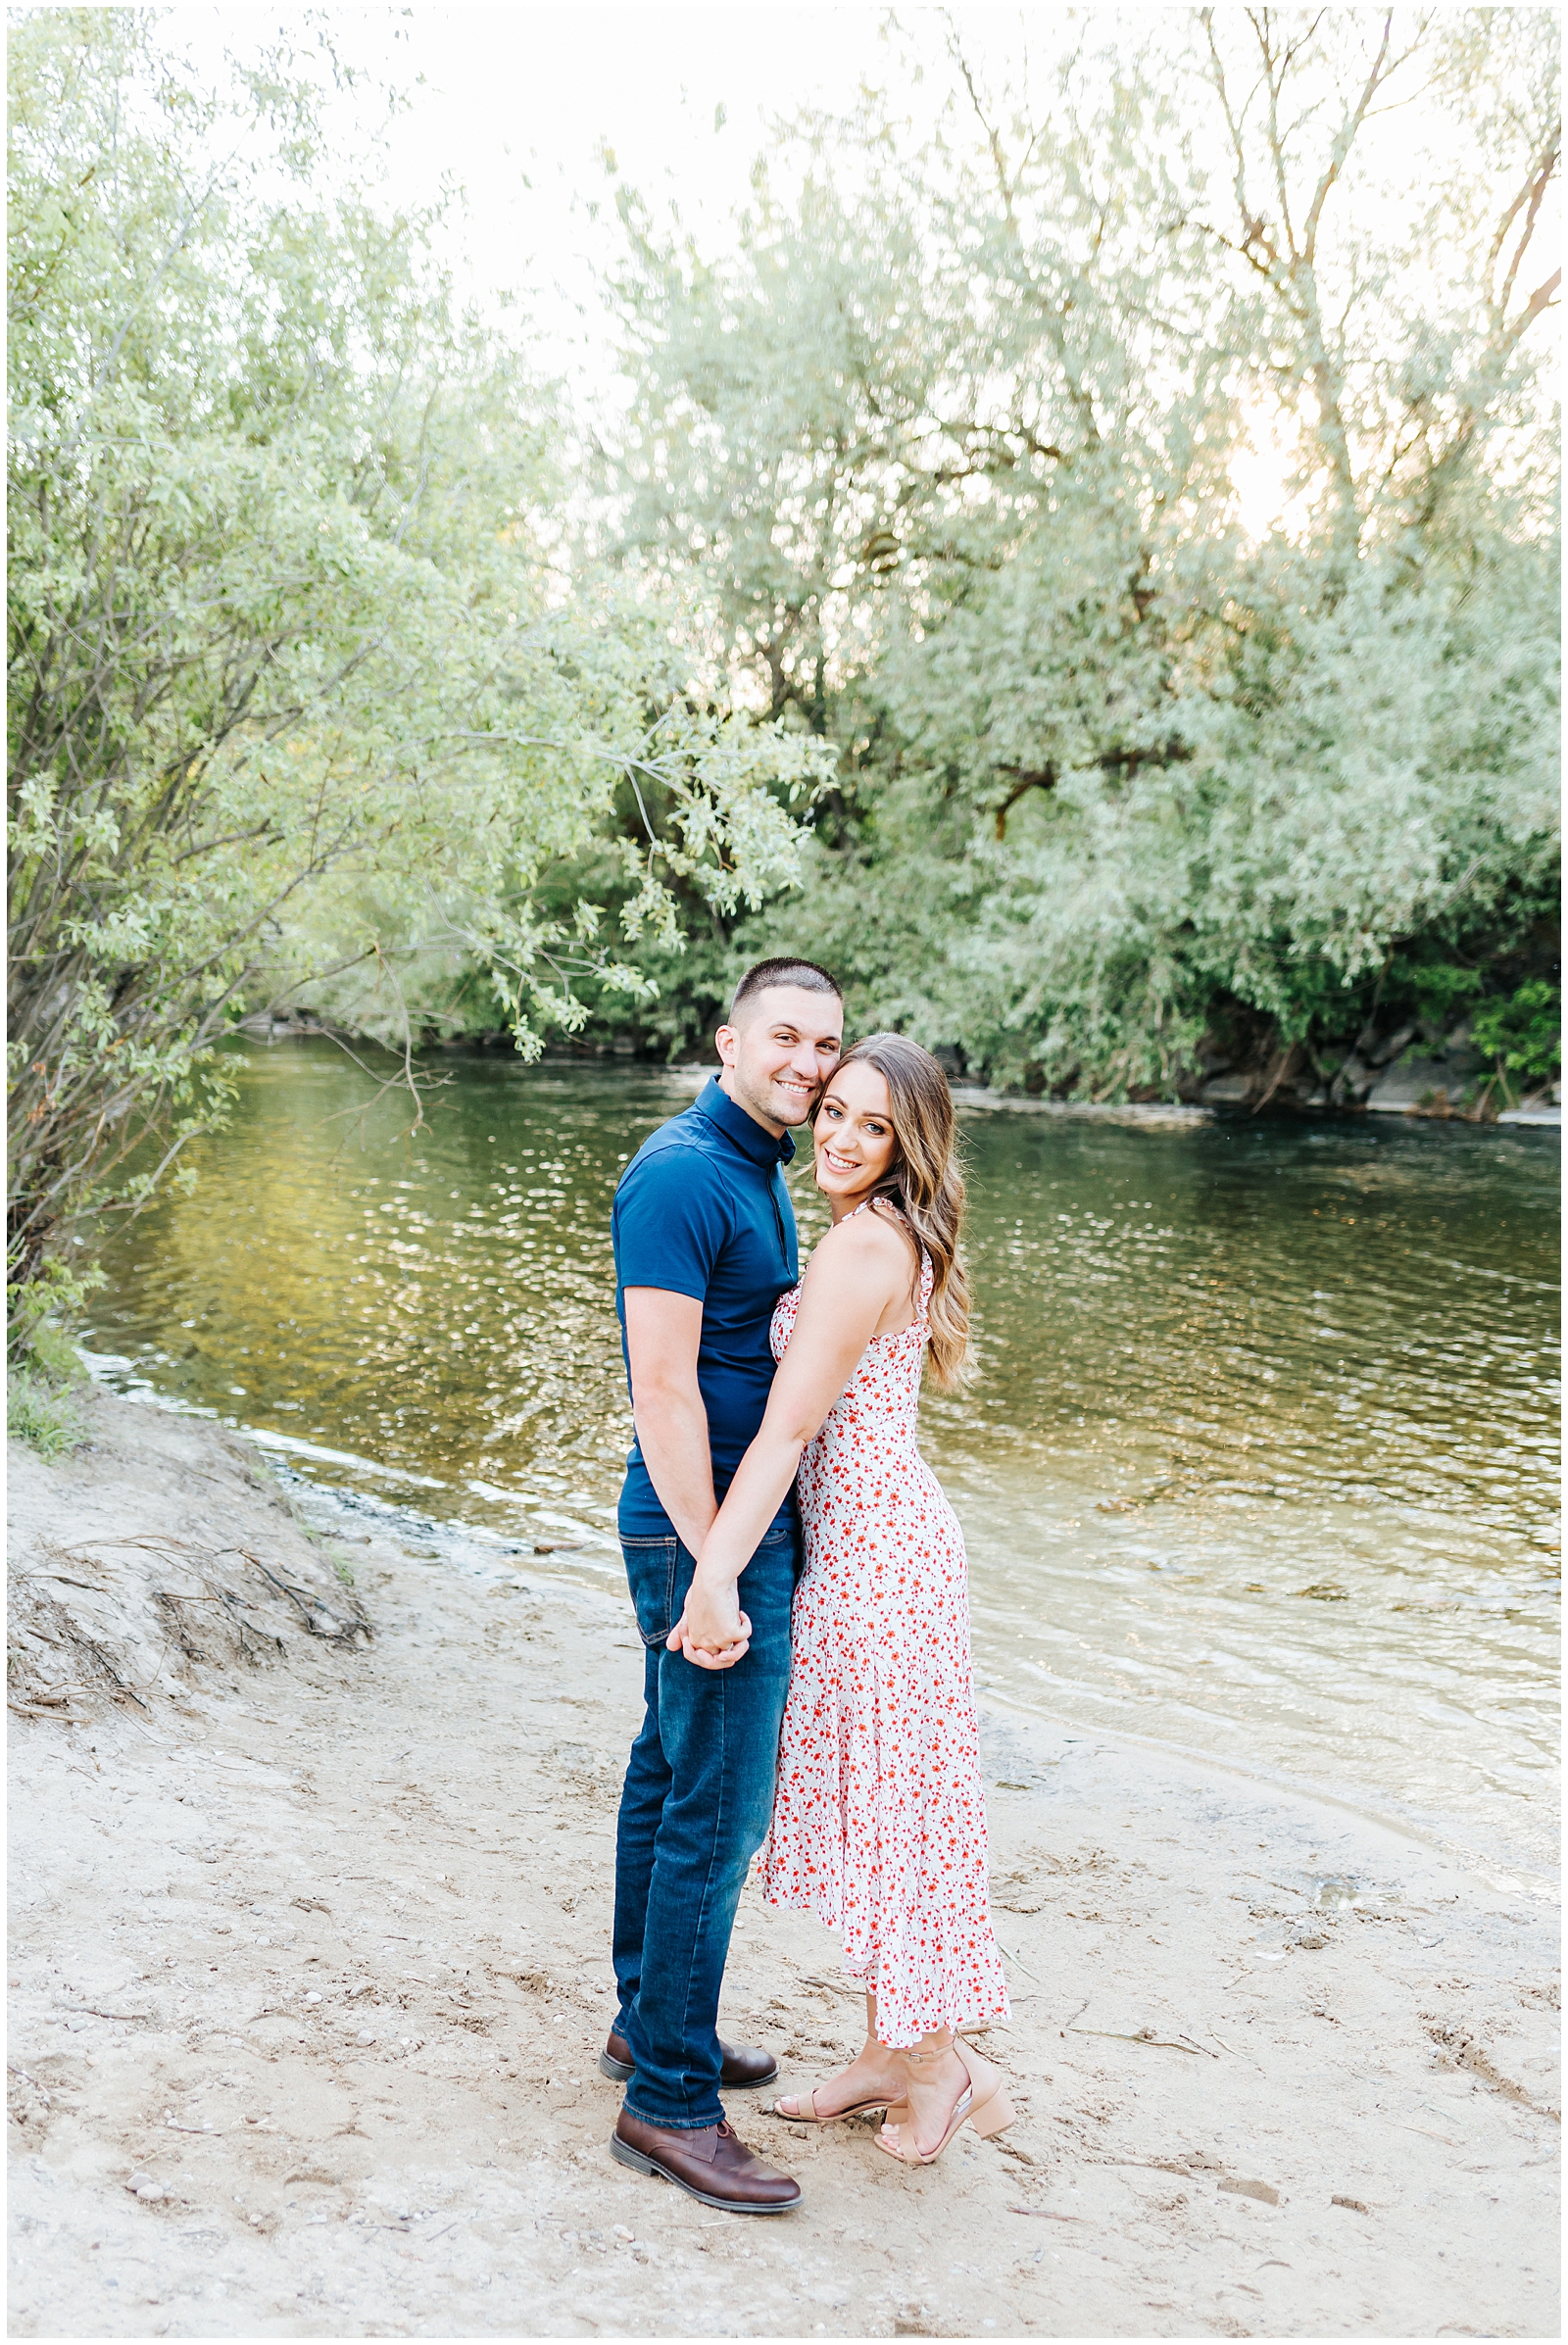 Dreamy, Romantic Light and Airy Spring Engagement Session on the Boise River